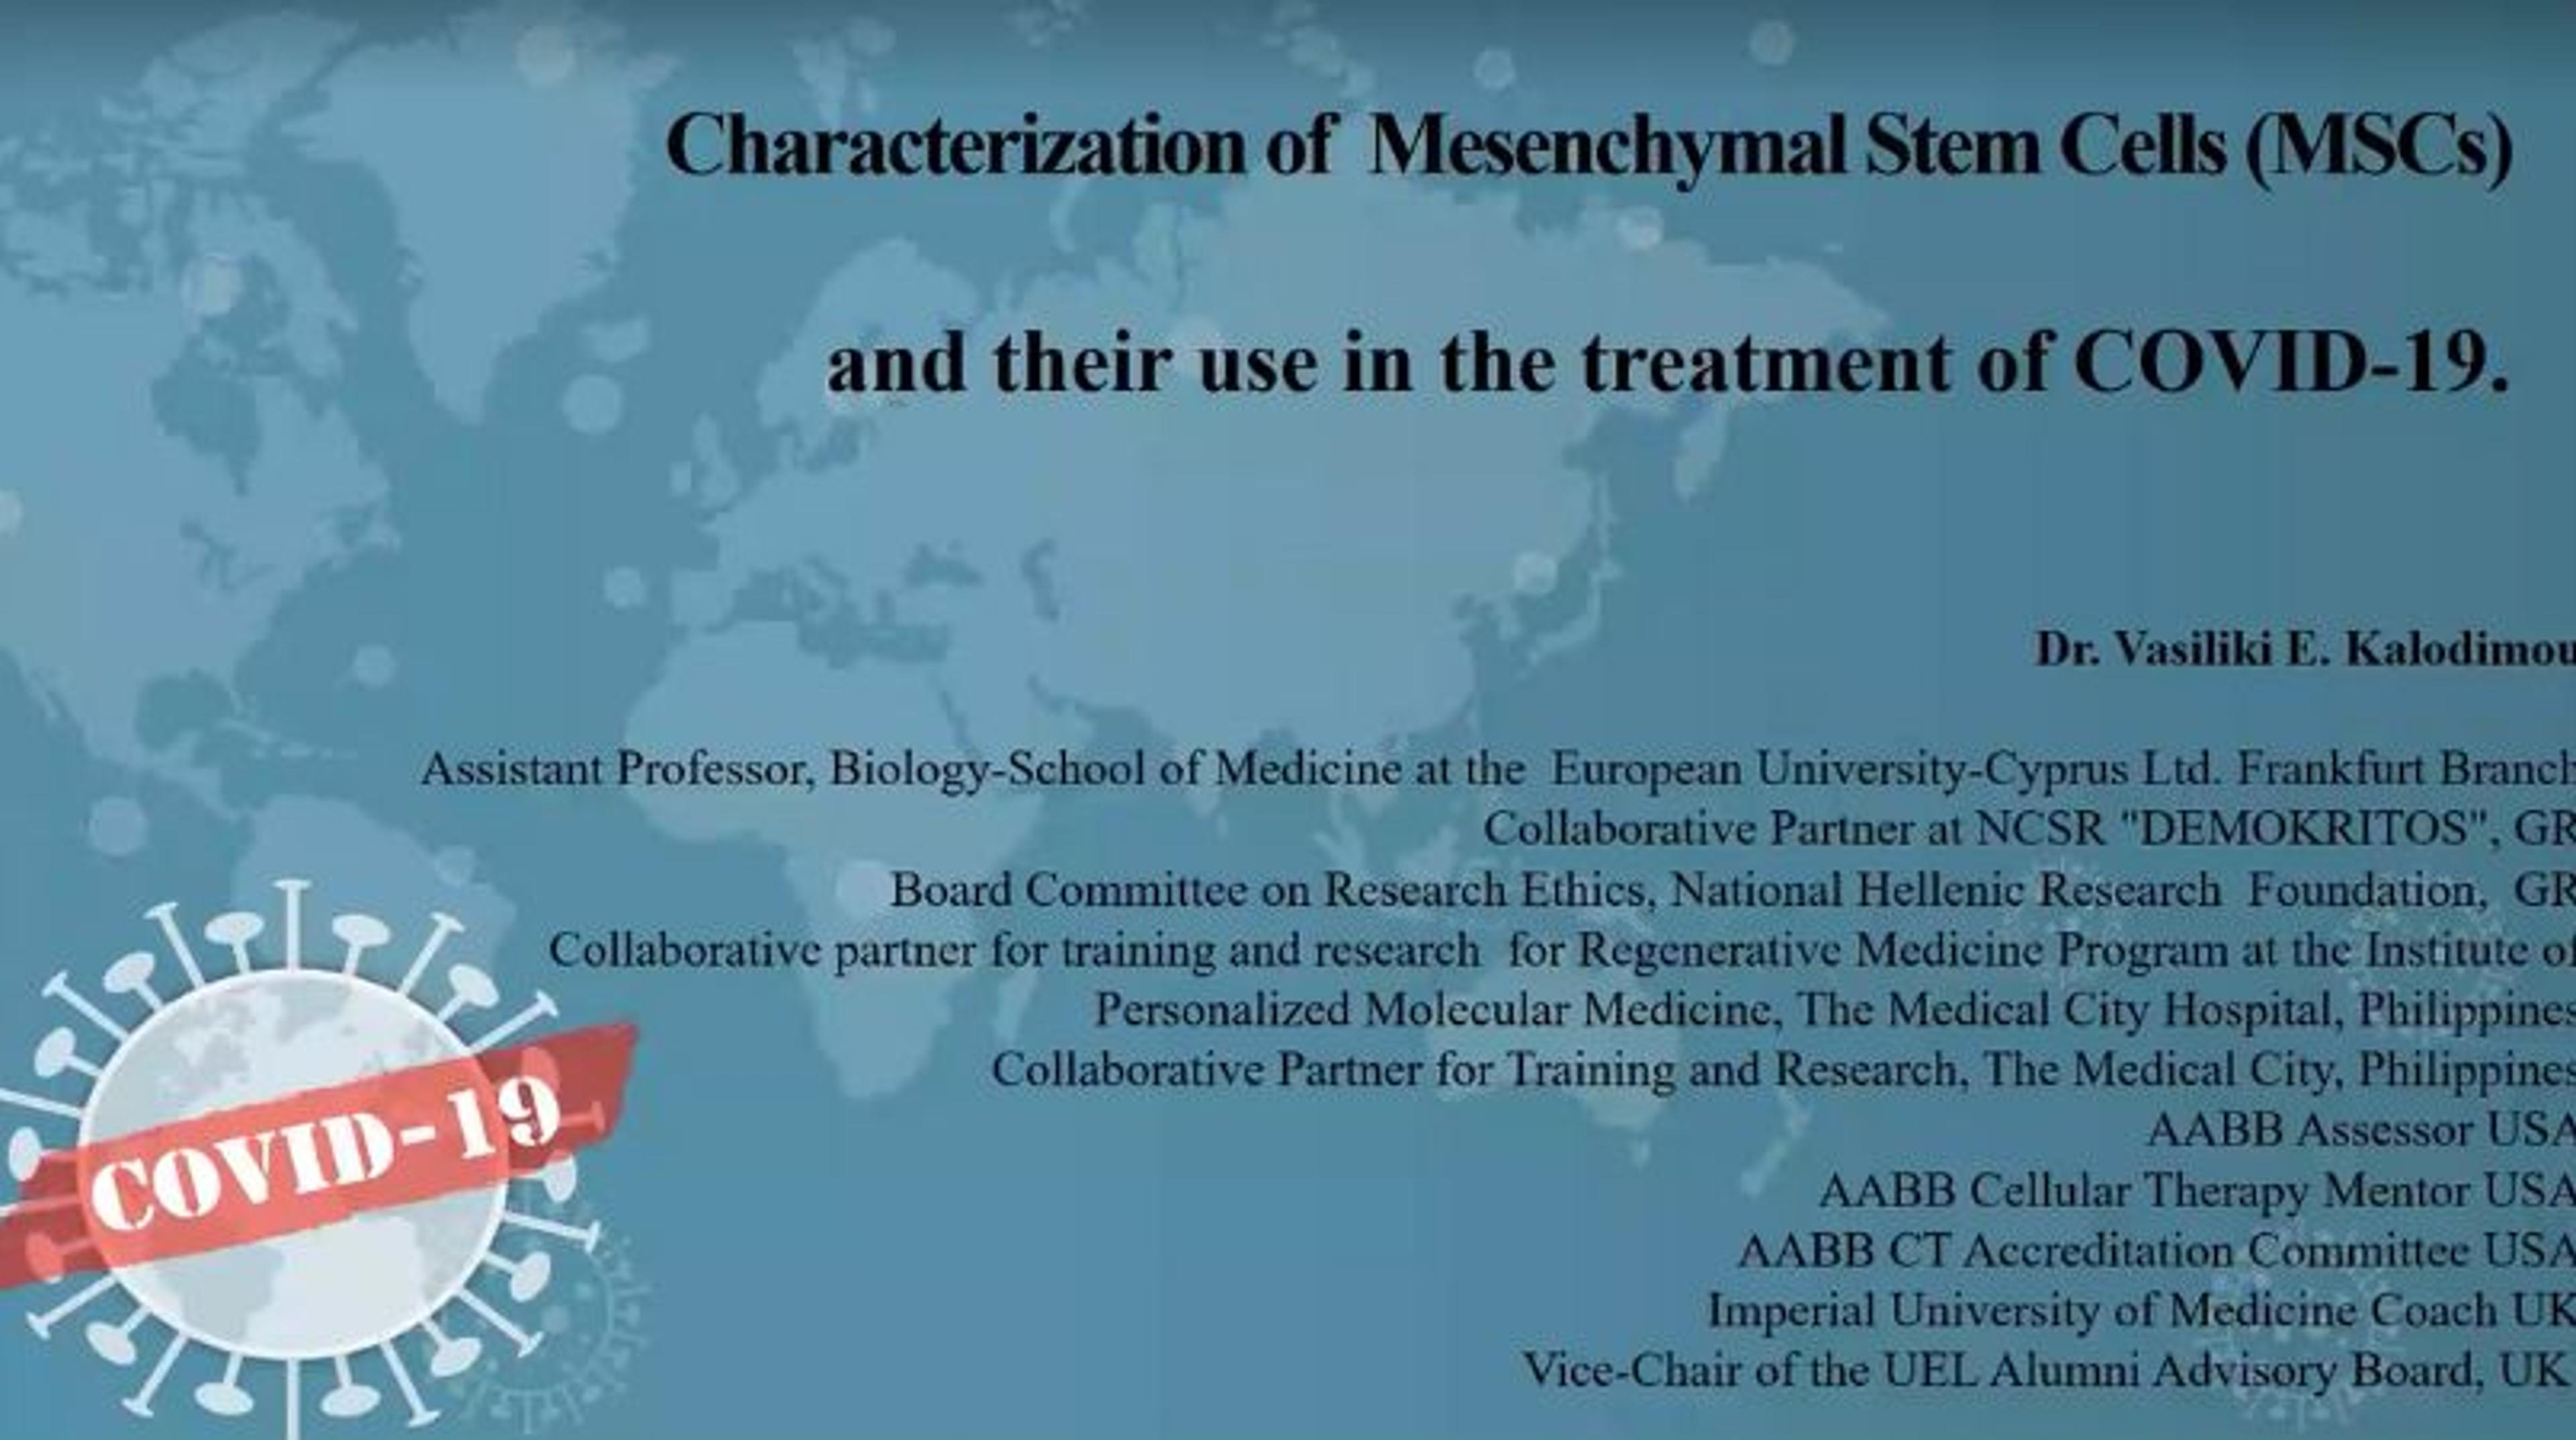 Characterization of Mesenchymal Stem Cells (MSCs) and their use in the treatment of COVID-19